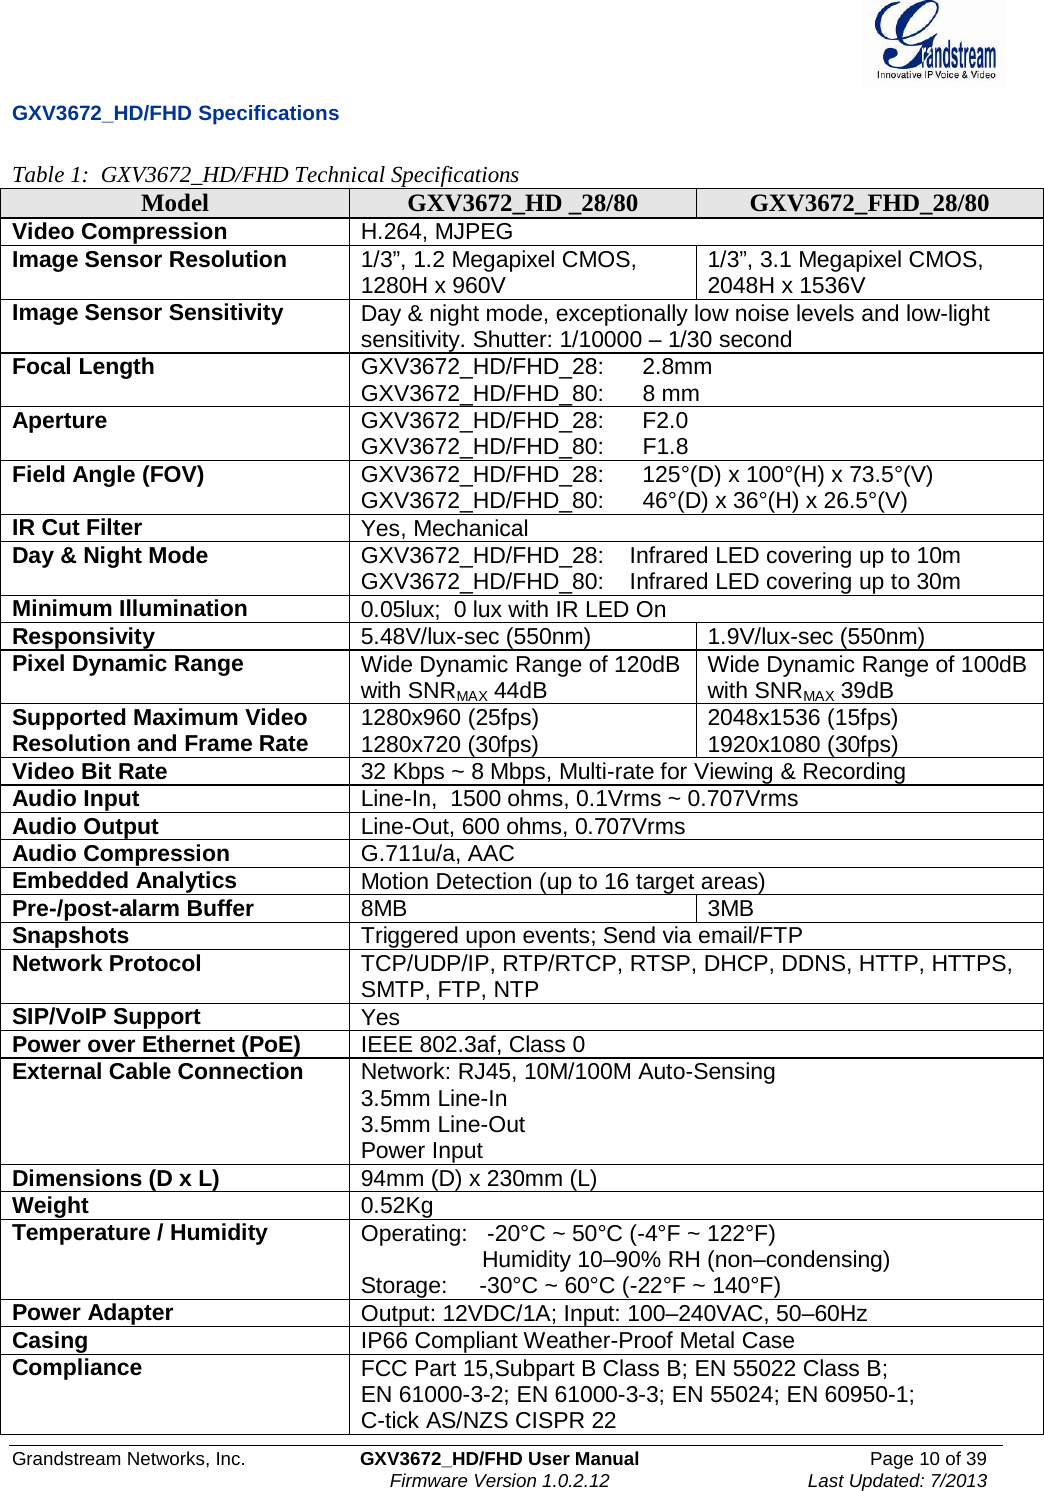  Grandstream Networks, Inc. GXV3672_HD/FHD User Manual Page 10 of 39   Firmware Version 1.0.2.12 Last Updated: 7/2013  GXV3672_HD/FHD Specifications  Table 1:  GXV3672_HD/FHD Technical Specifications Model GXV3672_HD _28/80 GXV3672_FHD_28/80 Video Compression  H.264, MJPEG Image Sensor Resolution 1/3”, 1.2 Megapixel CMOS, 1280H x 960V 1/3”, 3.1 Megapixel CMOS, 2048H x 1536V  Image Sensor Sensitivity Day &amp; night mode, exceptionally low noise levels and low-light sensitivity. Shutter: 1/10000 – 1/30 second  Focal Length GXV3672_HD/FHD_28:      2.8mm GXV3672_HD/FHD_80:      8 mm Aperture GXV3672_HD/FHD_28:      F2.0 GXV3672_HD/FHD_80:      F1.8 Field Angle (FOV) GXV3672_HD/FHD_28:      125°(D) x 100°(H) x 73.5°(V) GXV3672_HD/FHD_80:      46°(D) x 36°(H) x 26.5°(V) IR Cut Filter Yes, Mechanical Day &amp; Night Mode GXV3672_HD/FHD_28:    Infrared LED covering up to 10m GXV3672_HD/FHD_80:    Infrared LED covering up to 30m Minimum Illumination  0.05lux;  0 lux with IR LED On Responsivity  5.48V/lux-sec (550nm)  1.9V/lux-sec (550nm) Pixel Dynamic Range  Wide Dynamic Range of 120dB with SNRMAX 44dB Wide Dynamic Range of 100dB with SNRMAX 39dB Supported Maximum Video Resolution and Frame Rate 1280x960 (25fps) 1280x720 (30fps) 2048x1536 (15fps) 1920x1080 (30fps) Video Bit Rate  32 Kbps ~ 8 Mbps, Multi-rate for Viewing &amp; Recording Audio Input  Line-In,  1500 ohms, 0.1Vrms ~ 0.707Vrms Audio Output  Line-Out, 600 ohms, 0.707Vrms Audio Compression  G.711u/a, AAC Embedded Analytics  Motion Detection (up to 16 target areas) Pre-/post-alarm Buffer  8MB 3MB Snapshots  Triggered upon events; Send via email/FTP  Network Protocol  TCP/UDP/IP, RTP/RTCP, RTSP, DHCP, DDNS, HTTP, HTTPS, SMTP, FTP, NTP SIP/VoIP Support  Yes Power over Ethernet (PoE)  IEEE 802.3af, Class 0 External Cable Connection Network: RJ45, 10M/100M Auto-Sensing 3.5mm Line-In 3.5mm Line-Out Power Input Dimensions (D x L)  94mm (D) x 230mm (L) Weight  0.52Kg Temperature / Humidity  Operating:   -20°C ~ 50°C (-4°F ~ 122°F)                    Humidity 10–90% RH (non–condensing)  Storage:     -30°C ~ 60°C (-22°F ~ 140°F) Power Adapter  Output: 12VDC/1A; Input: 100–240VAC, 50–60Hz  Casing  IP66 Compliant Weather-Proof Metal Case Compliance  FCC Part 15,Subpart B Class B; EN 55022 Class B;  EN 61000-3-2; EN 61000-3-3; EN 55024; EN 60950-1;  C-tick AS/NZS CISPR 22 